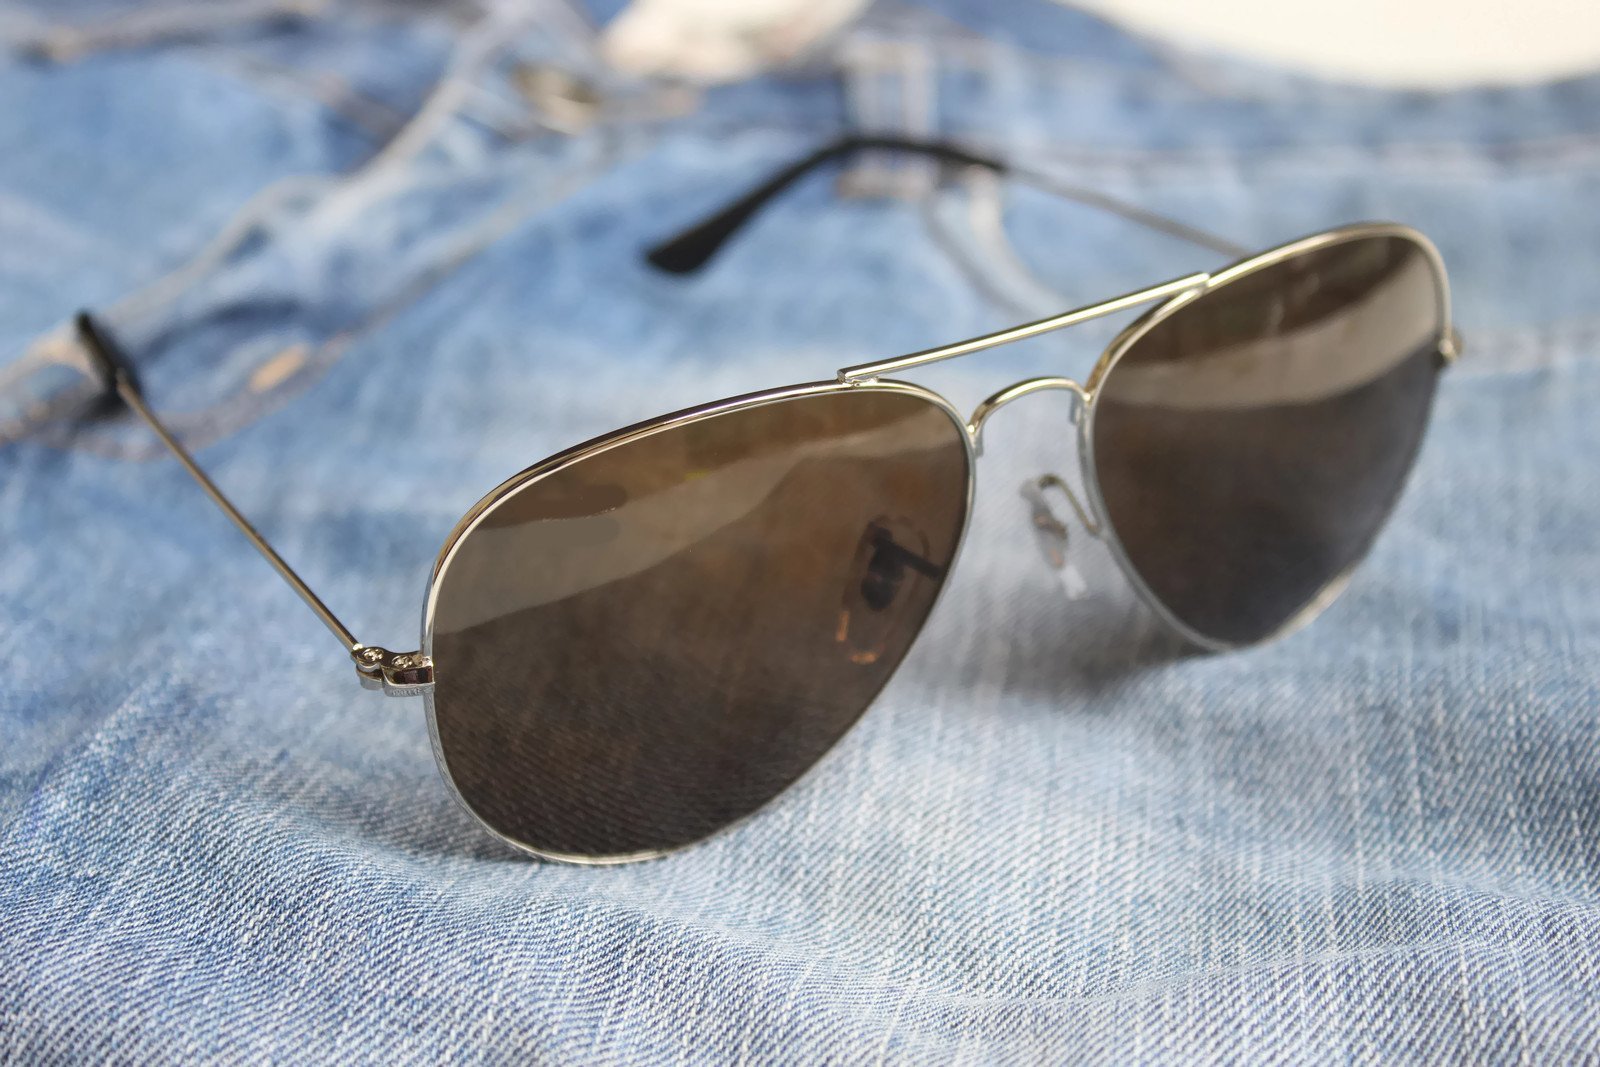 FunkyTradition Silver Brown Shade Aviator Sunglasses - FunkyTradition